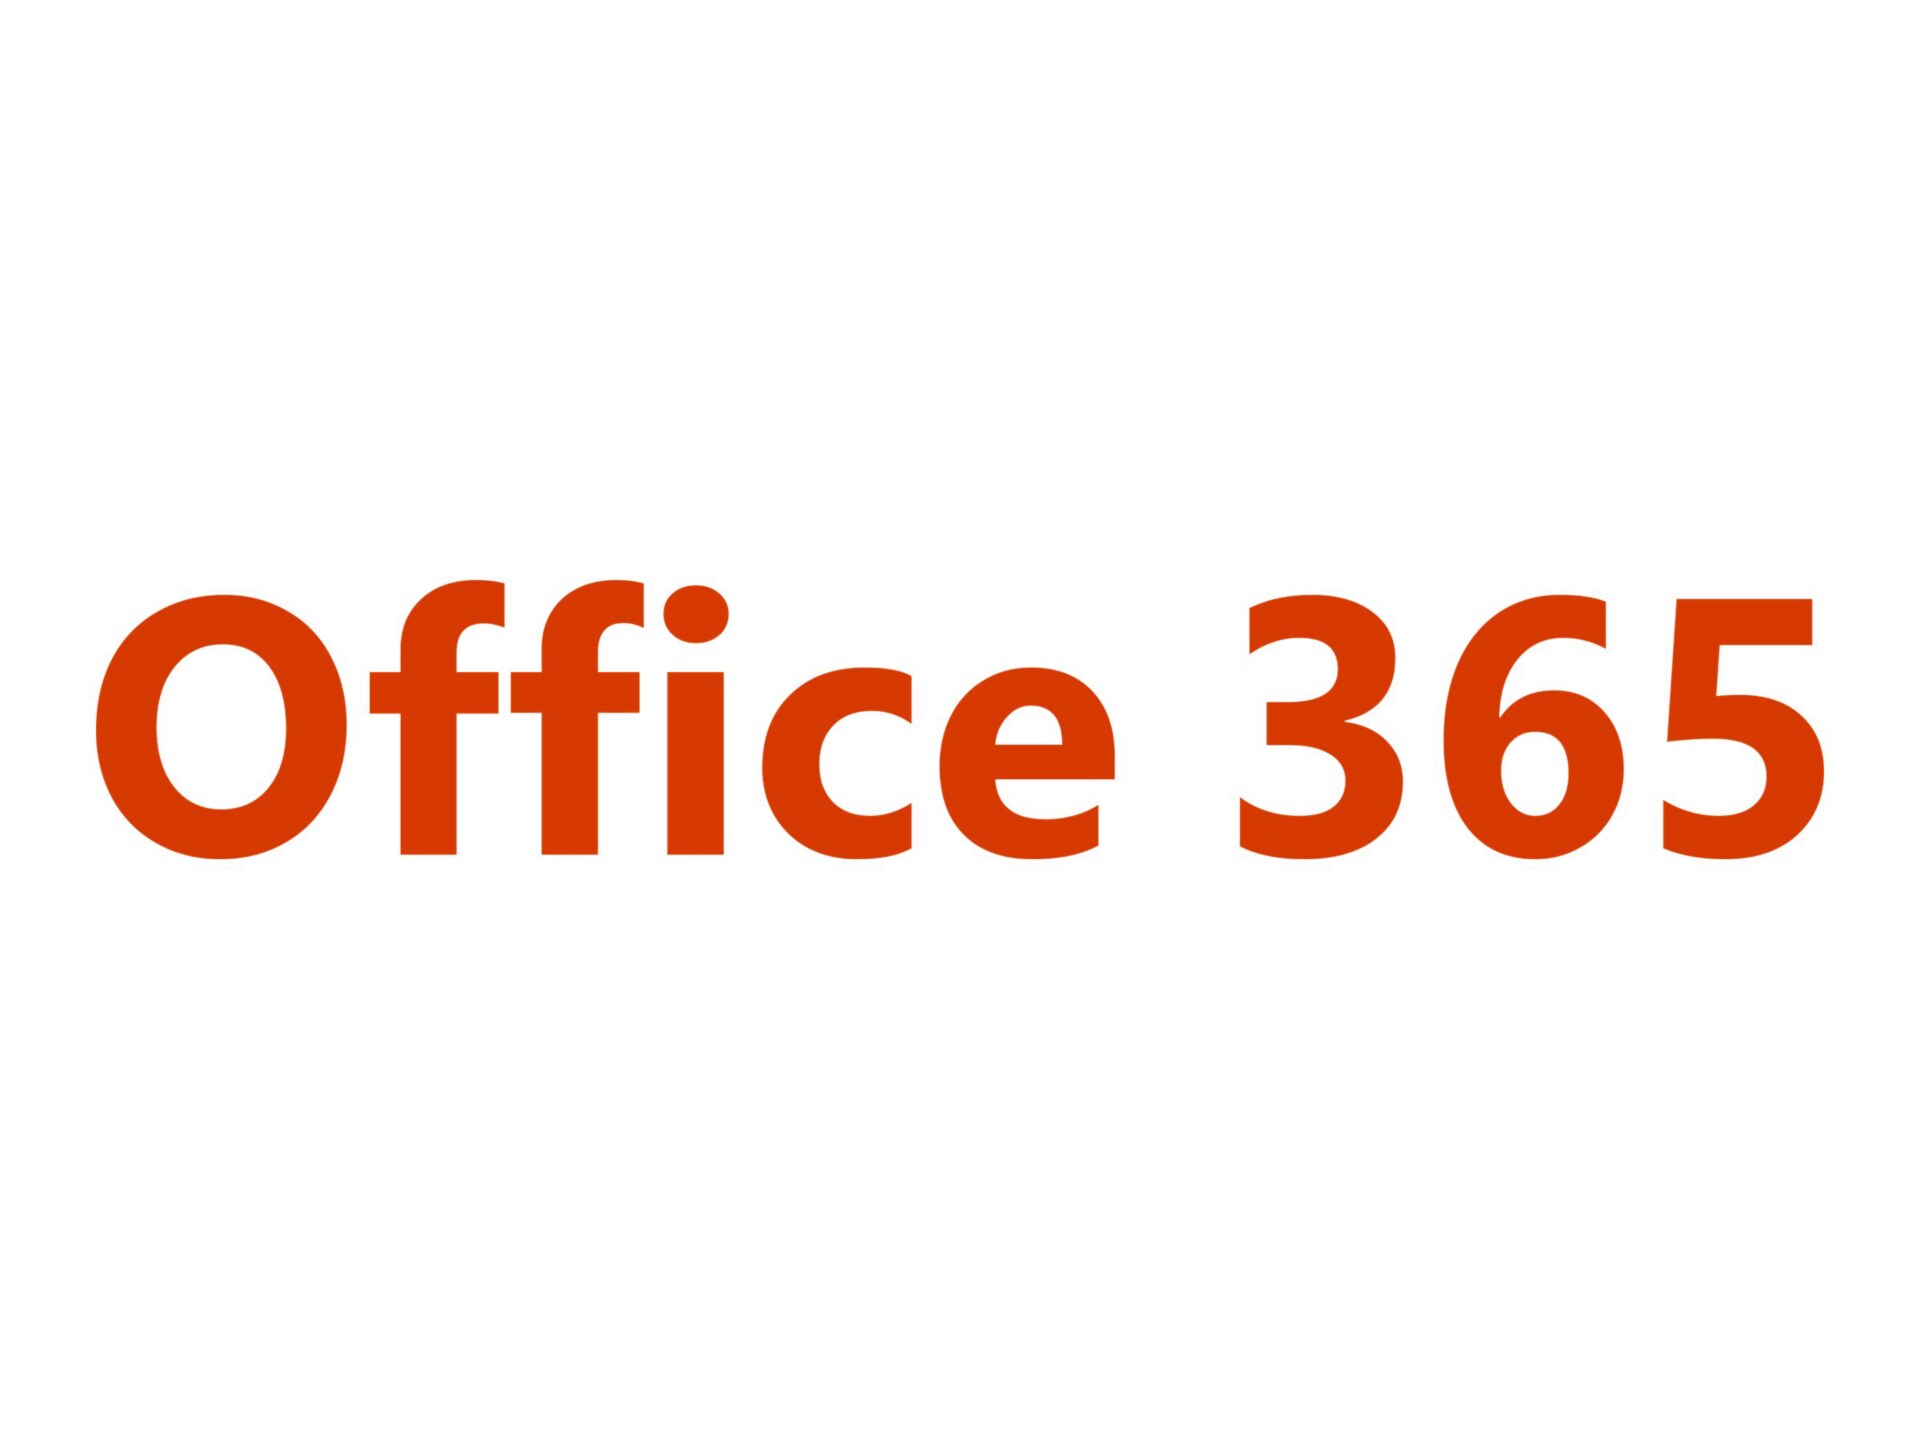 Microsoft Office 365 (Plan E5) without PSTN - step-up license - 1 user